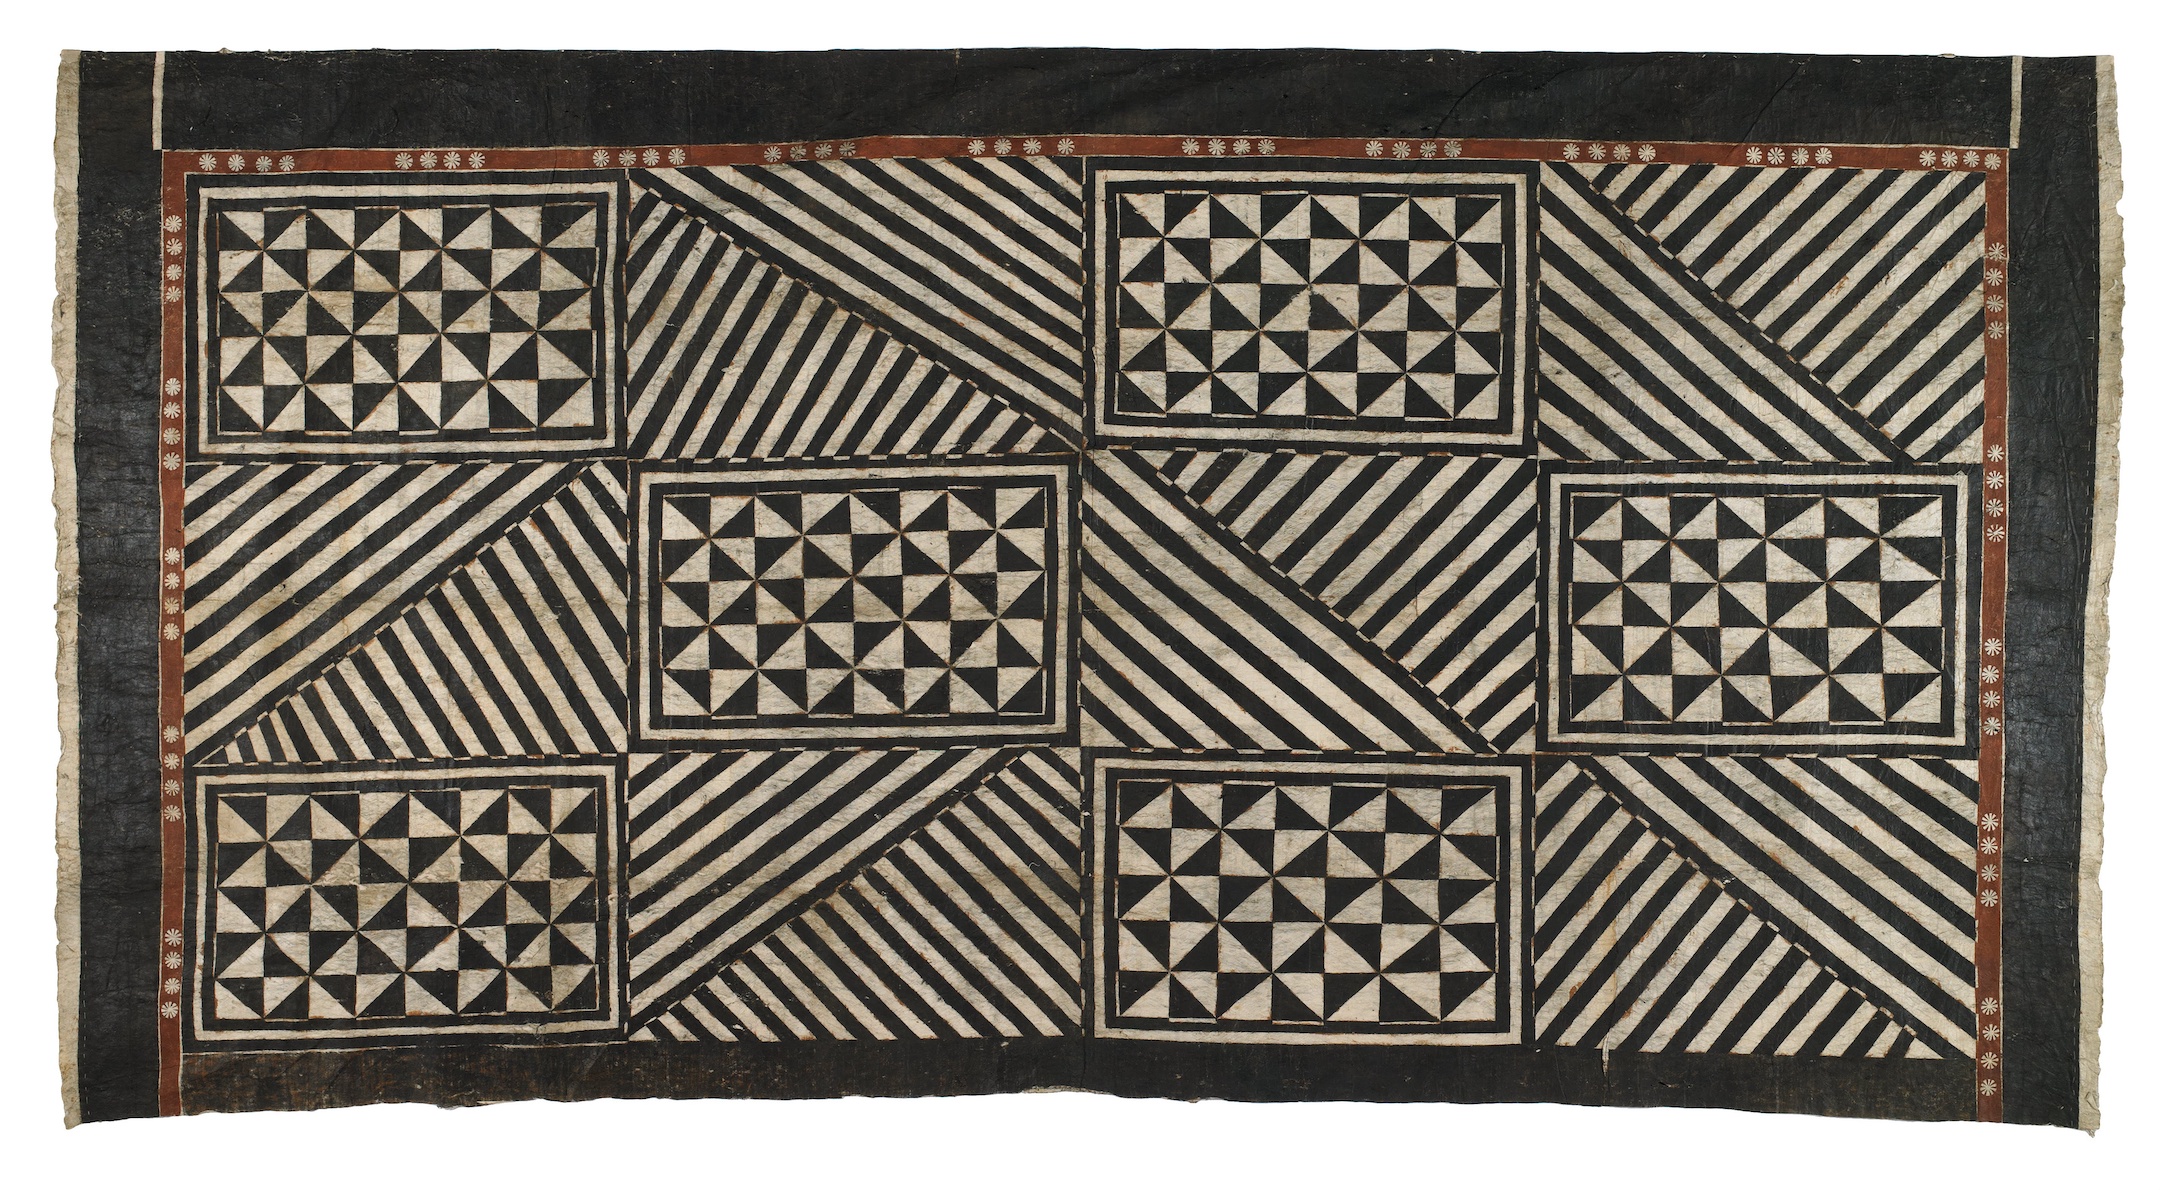 Masi (tapa cloth), likely used as a room divider, Fiji, date unknown, 300 x 428 cm (Te Papa, New Zealand)